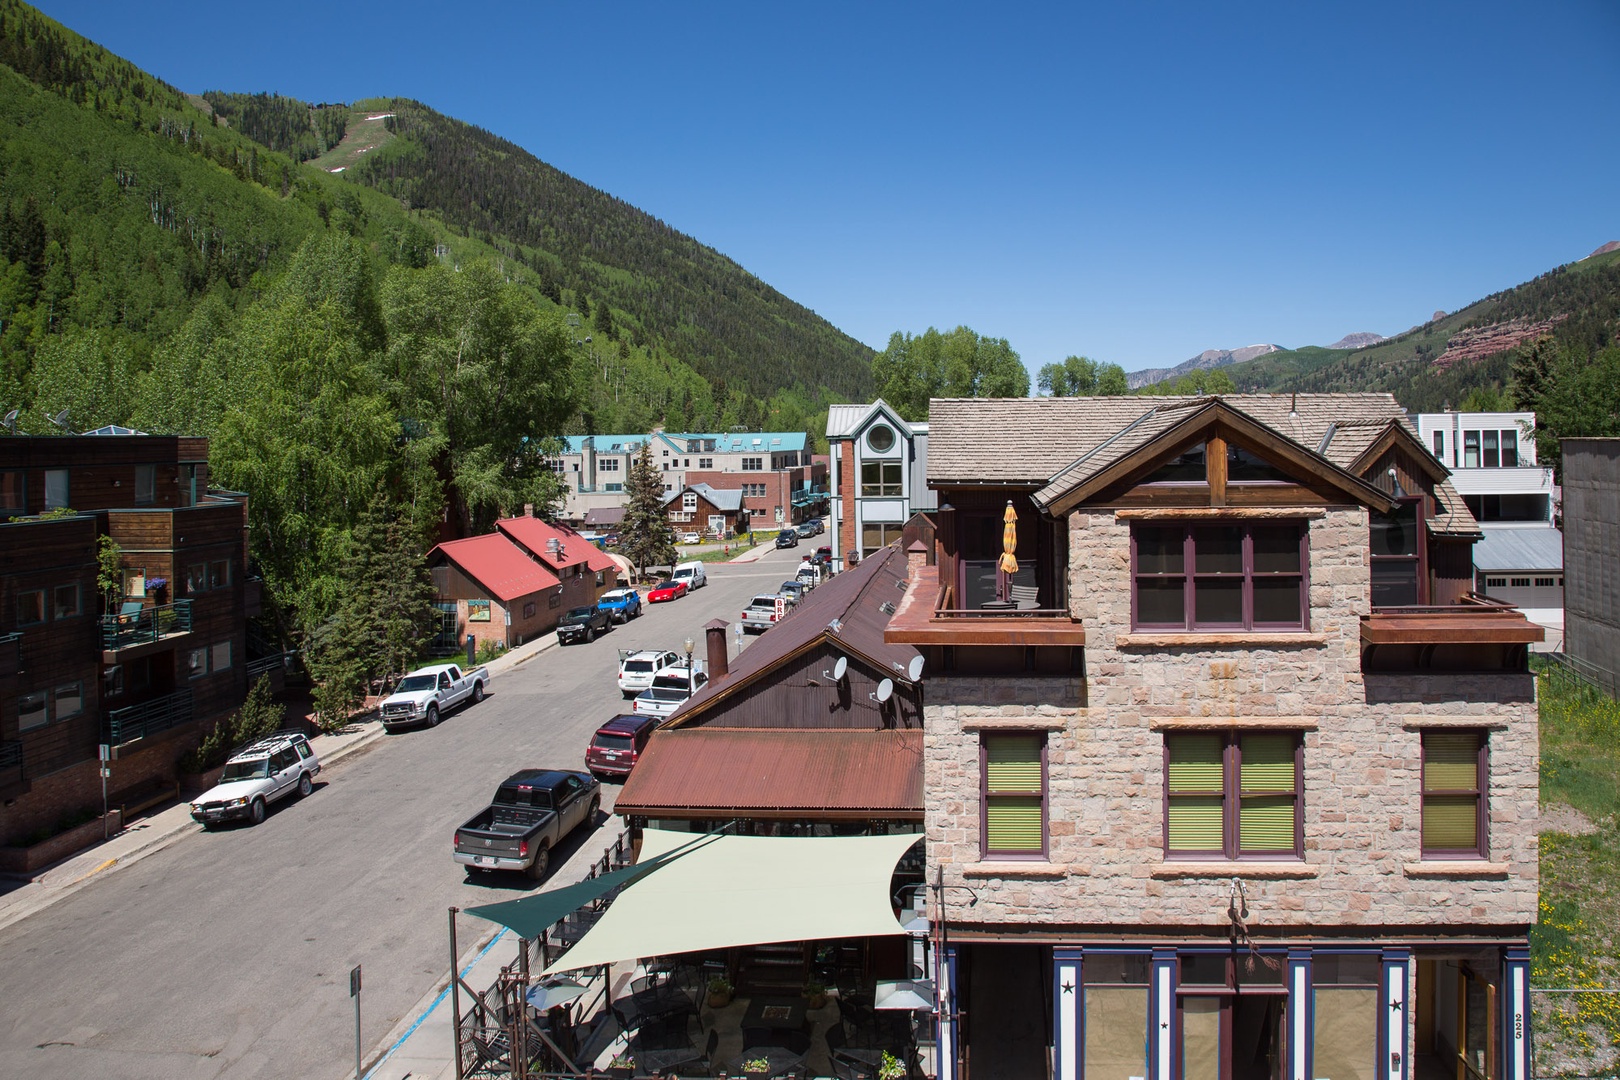 A perfect in town location - 150 yards to the Gondola and just 2 Telluride-town blocks to Town Park